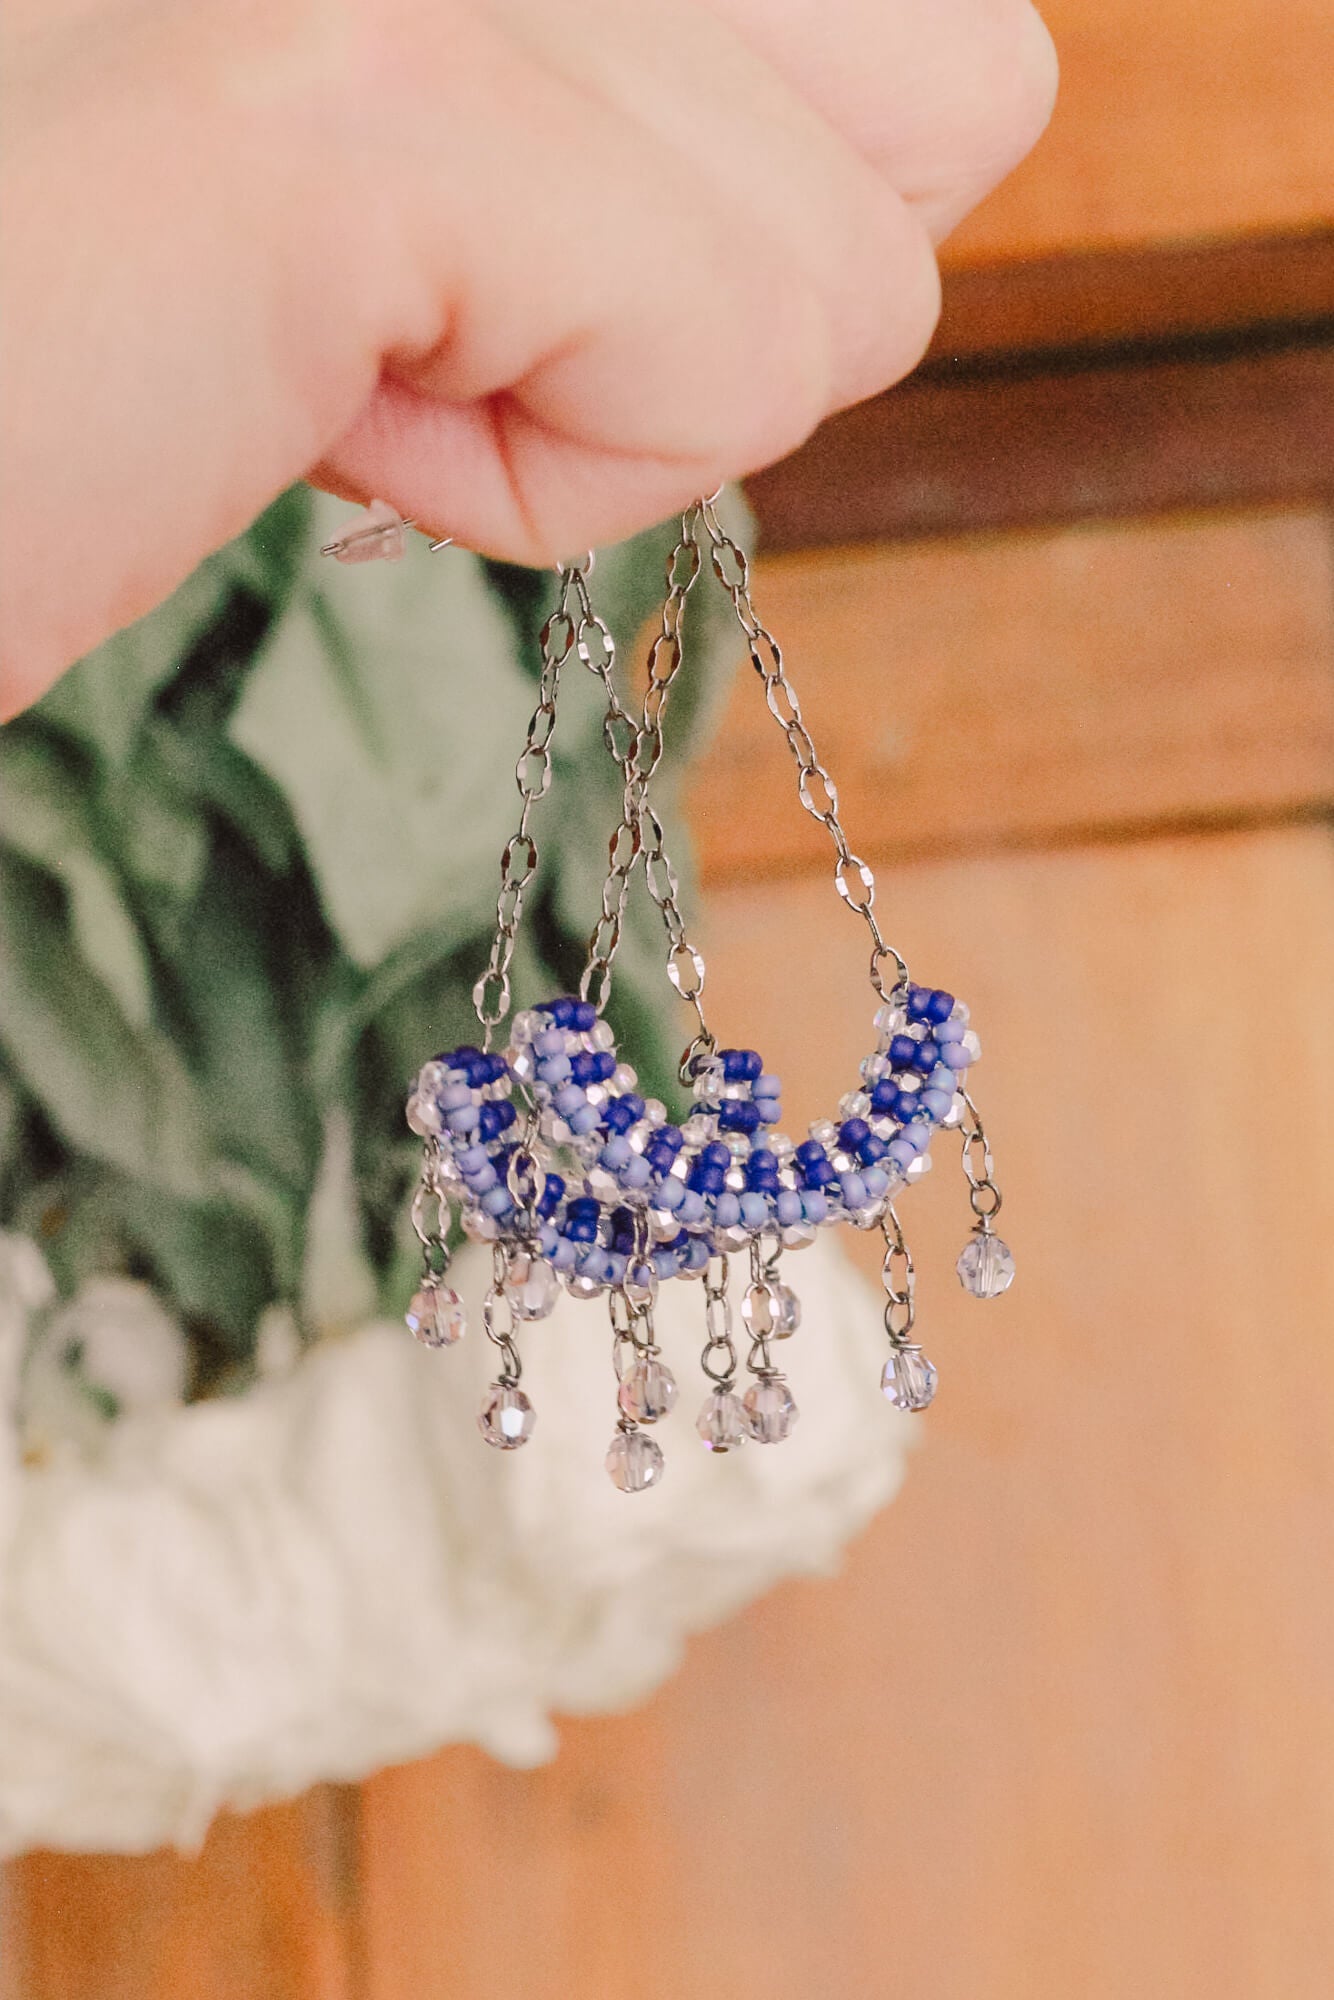 Chandelier earrings delicately made with tiny beads of various shades of blue and silver accents – a timeless set of earrings #somethingblue #bridalaccessories #vintageinspired #statementearrings #hottahaveit